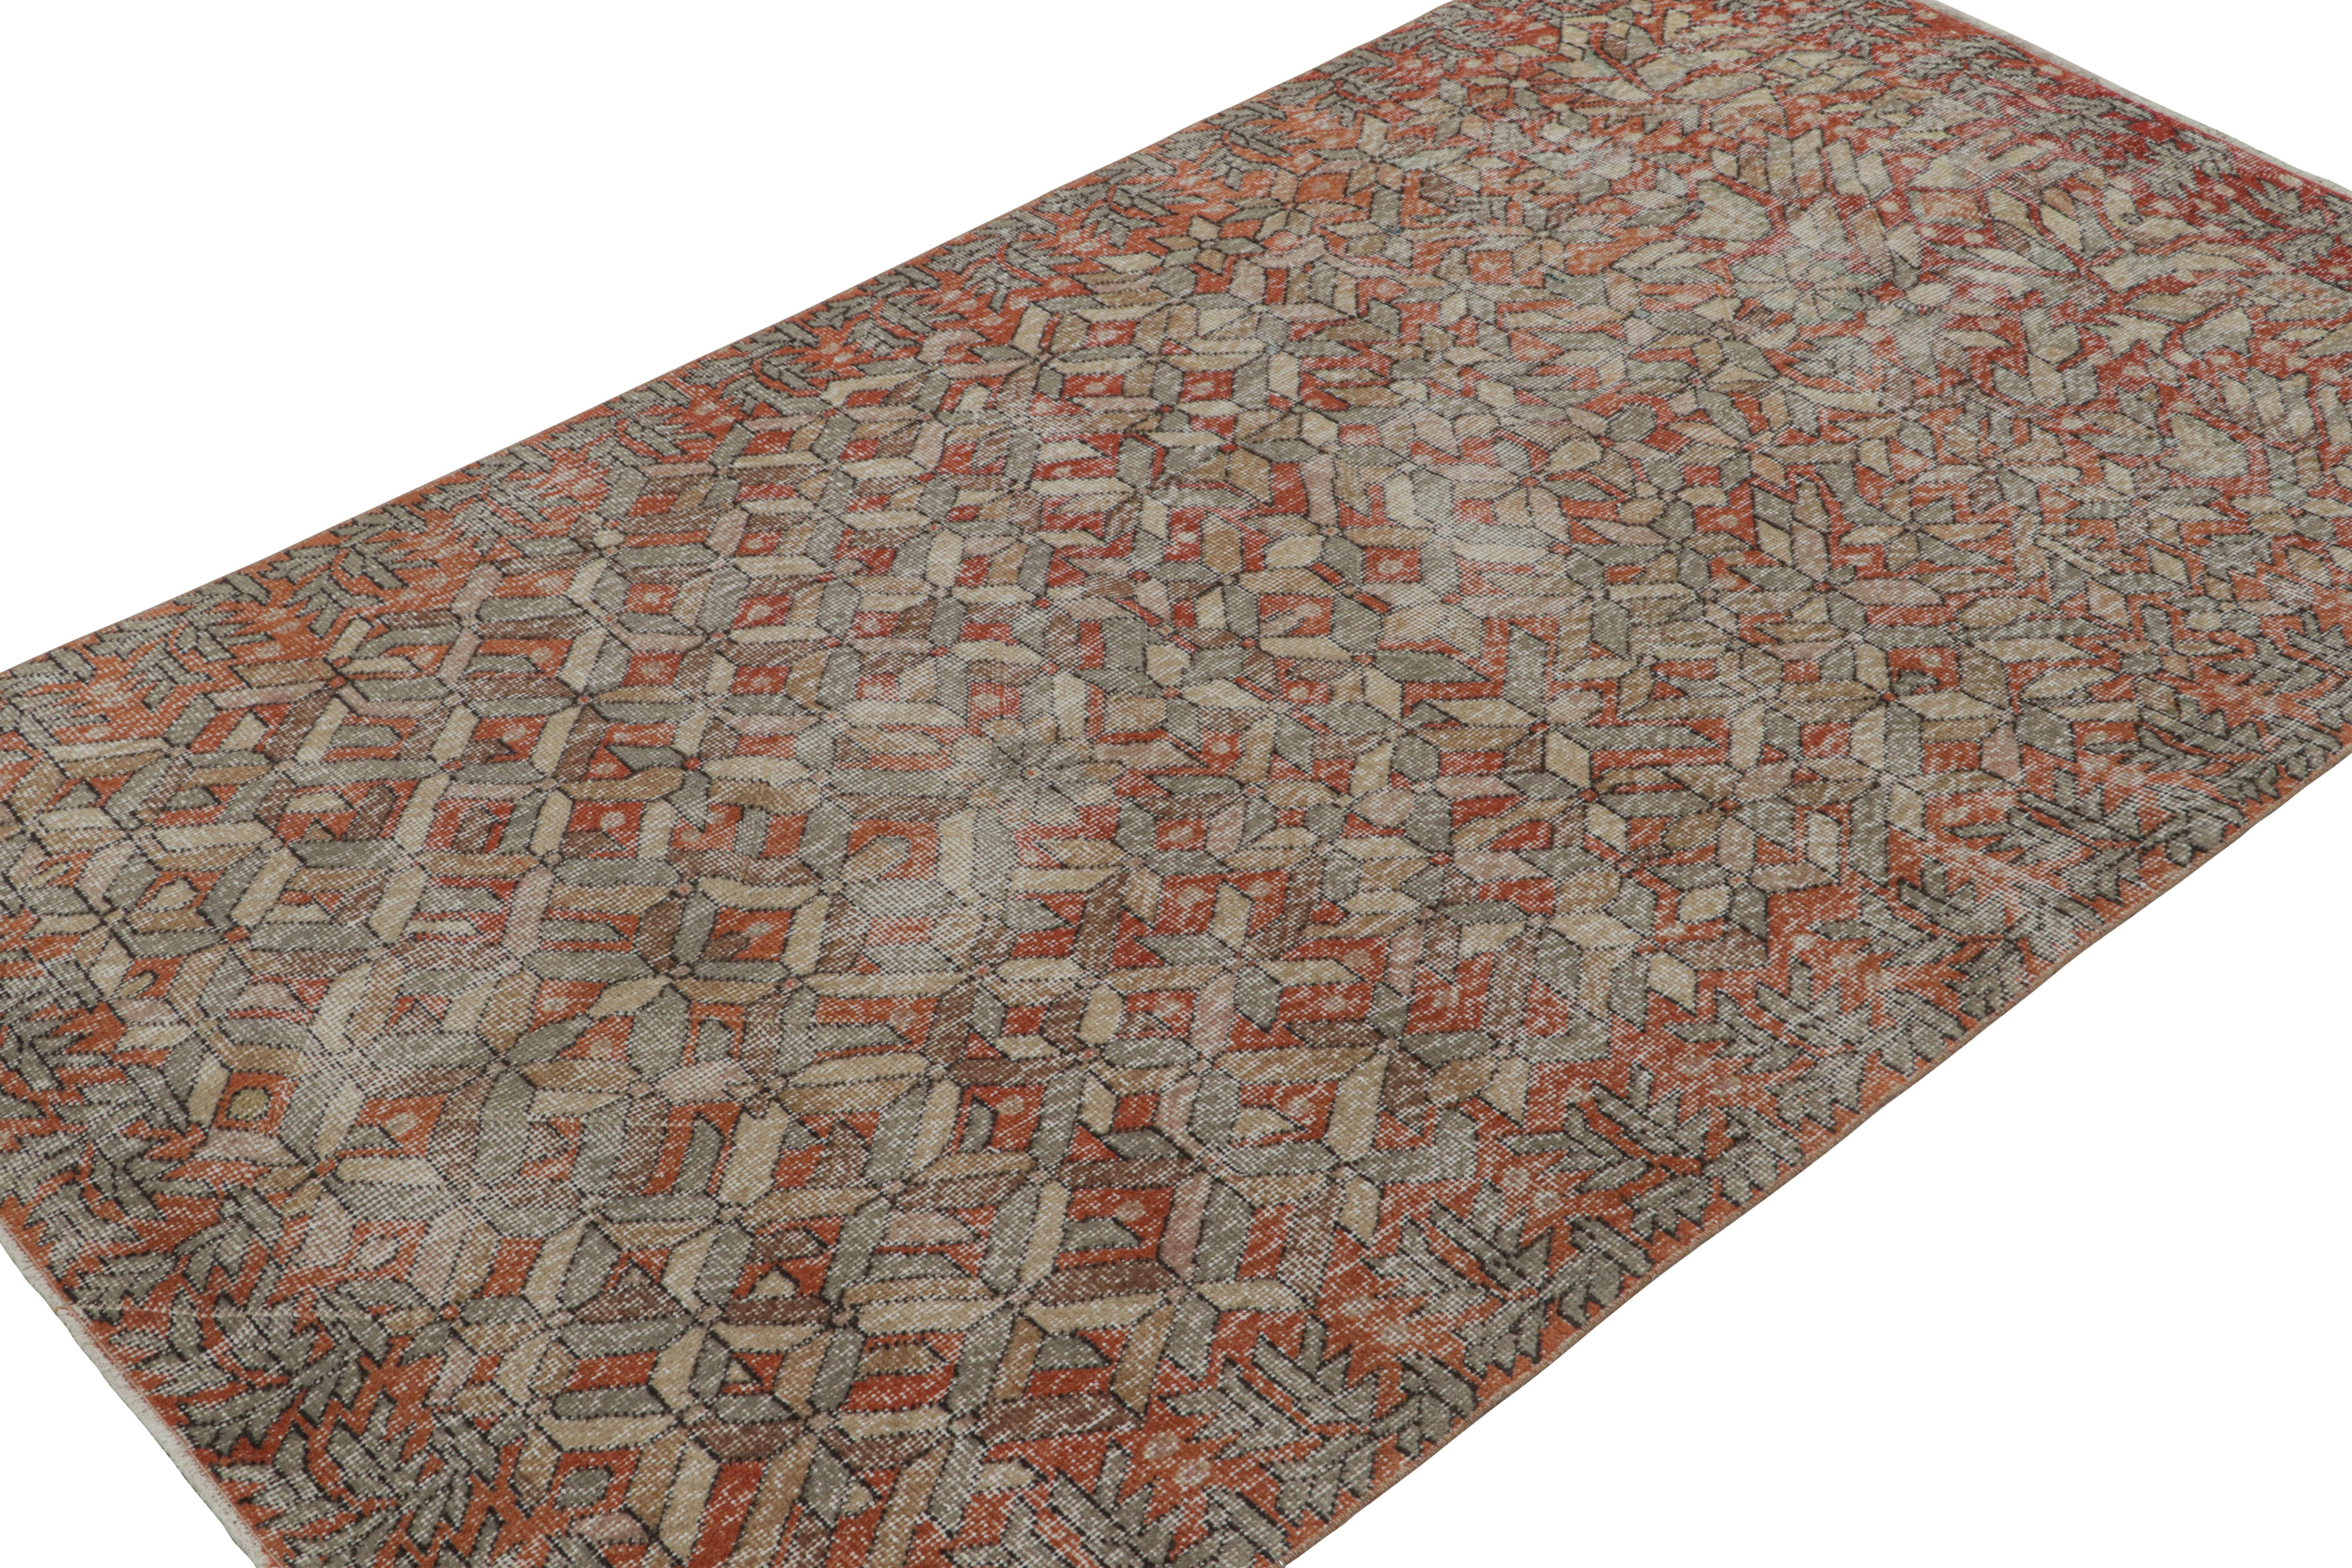 Hand-knotted in wool, circa 1960 - 1970, this 8x9 vintage Müren Art Deco rug is an exciting new addition to Rug & Kilim Mid-century Pasha Collection. Its design, displaying an industrial attitude within Art Deco, is believed to be a rare work of